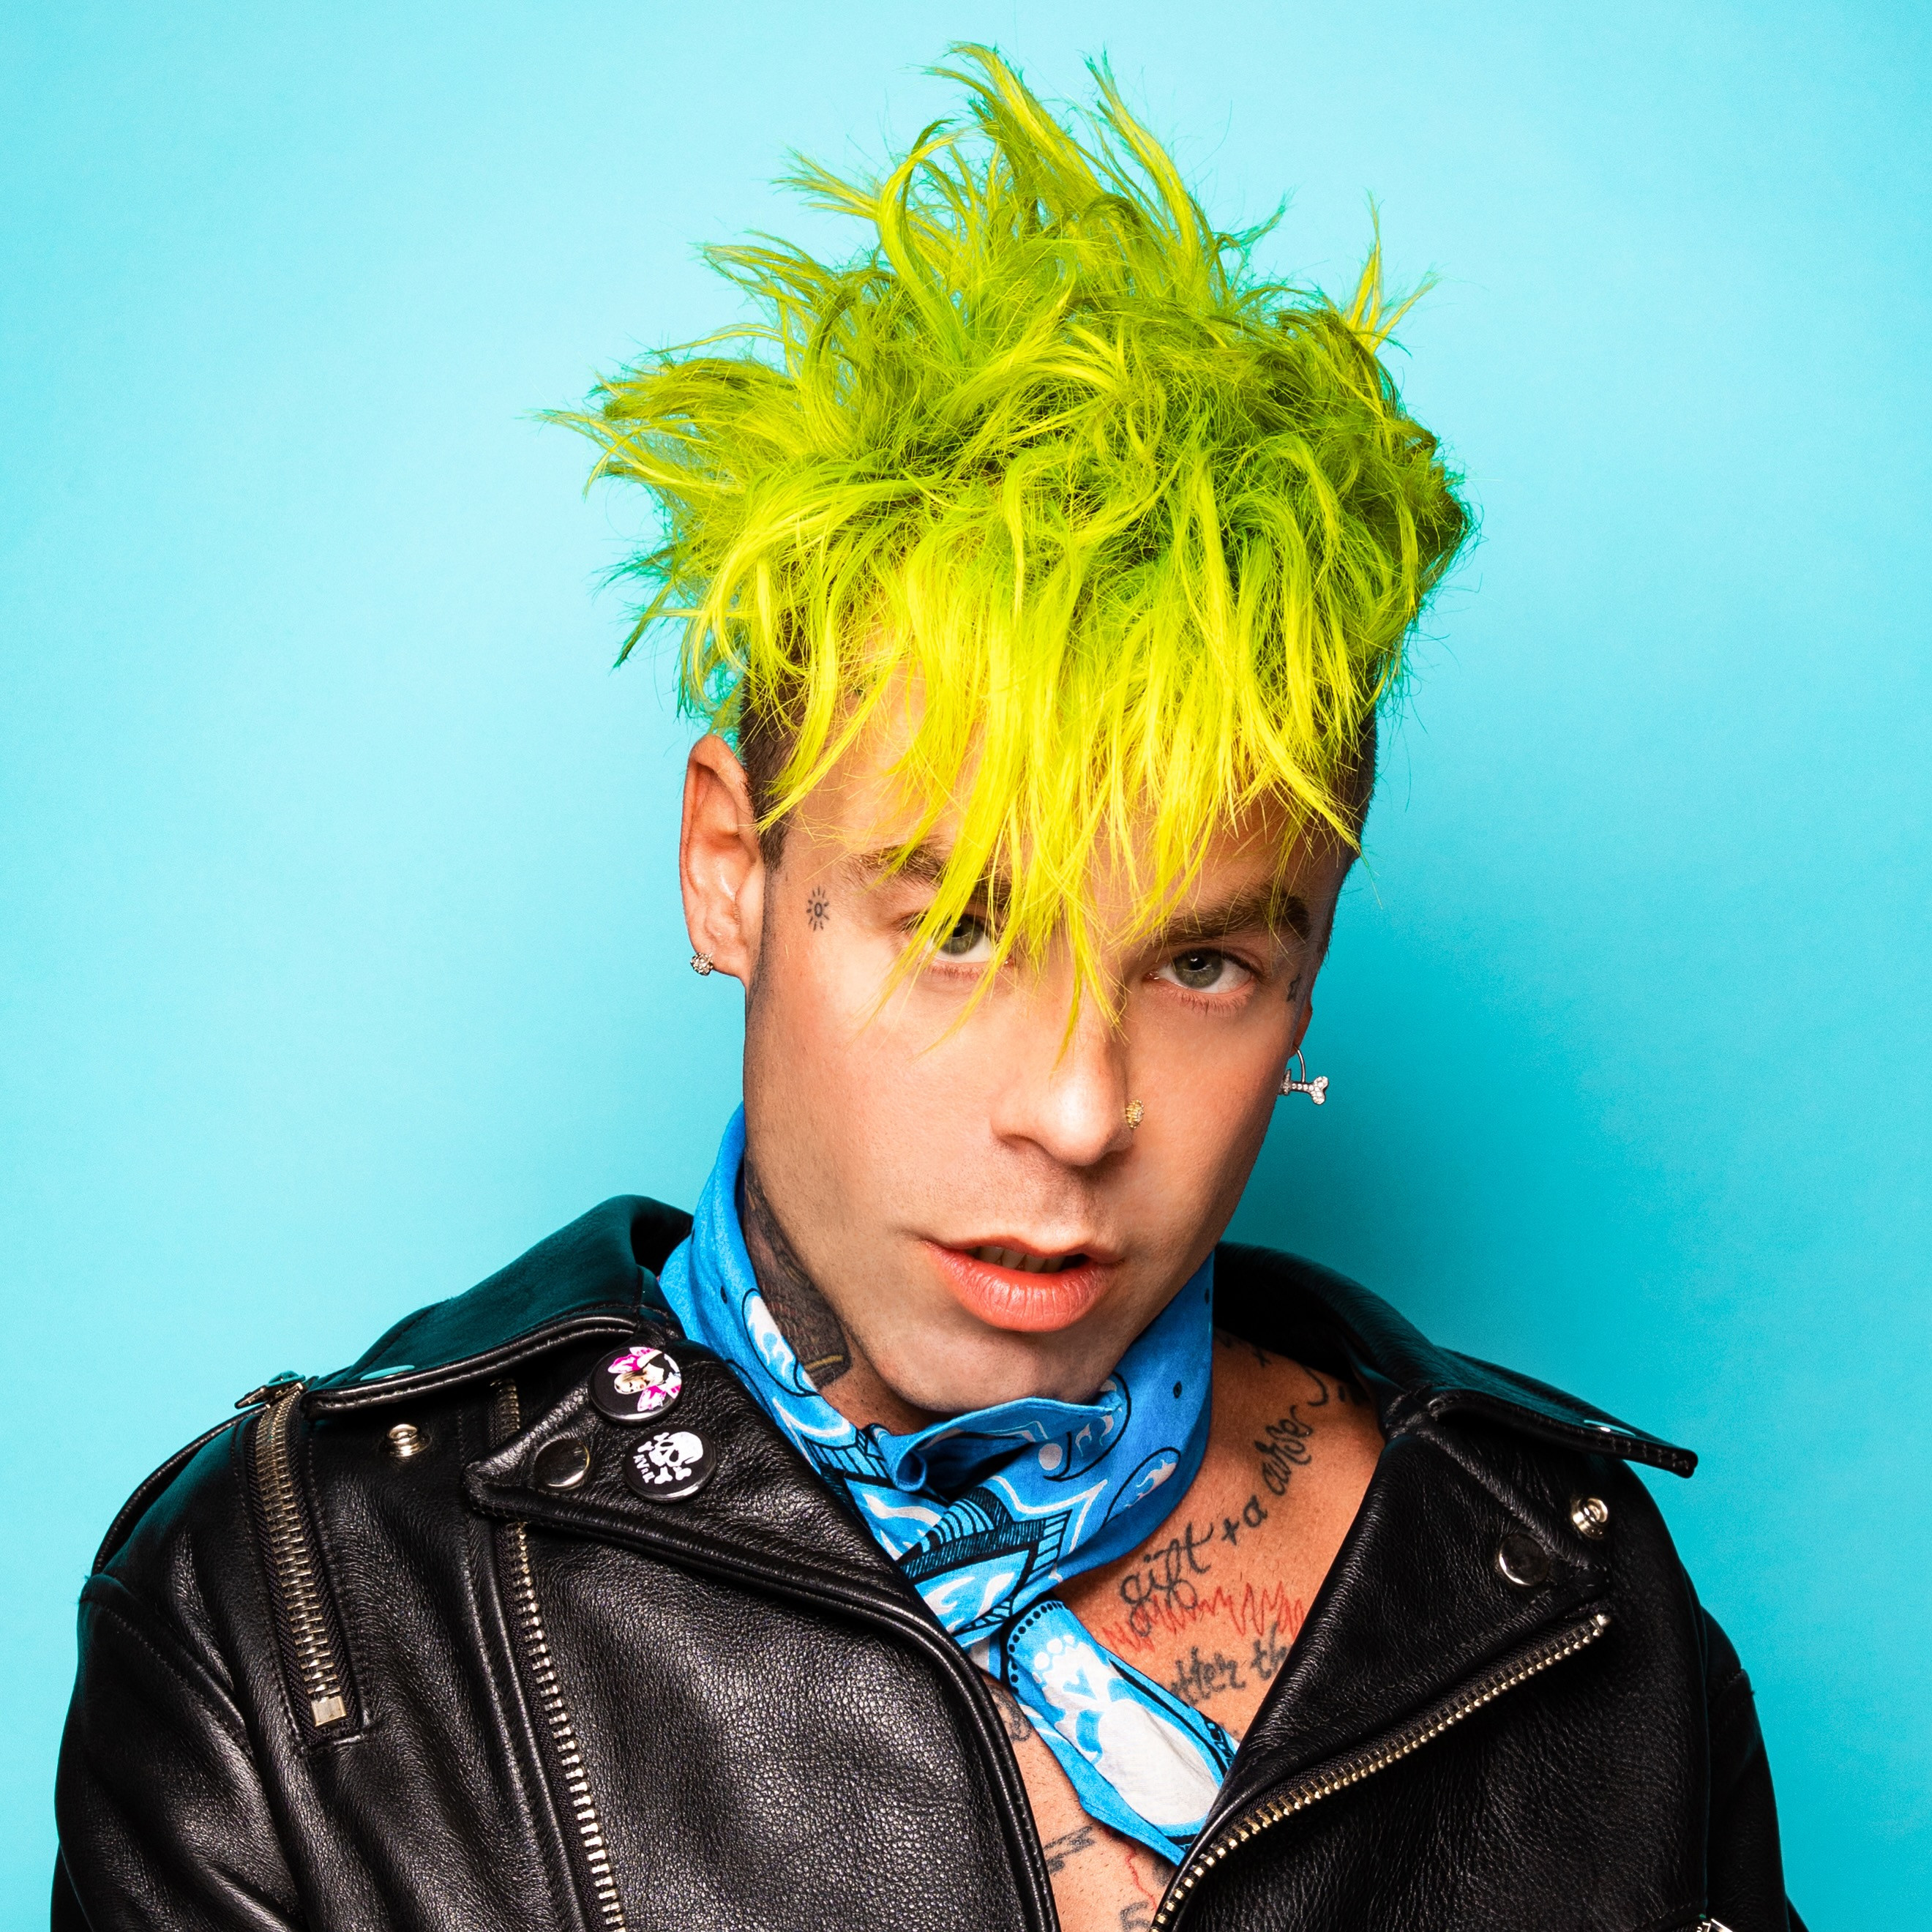 Mod Sun says Avril Lavigne collab on Flames came about ‘like magic’ as he talks reinventing the rockstar